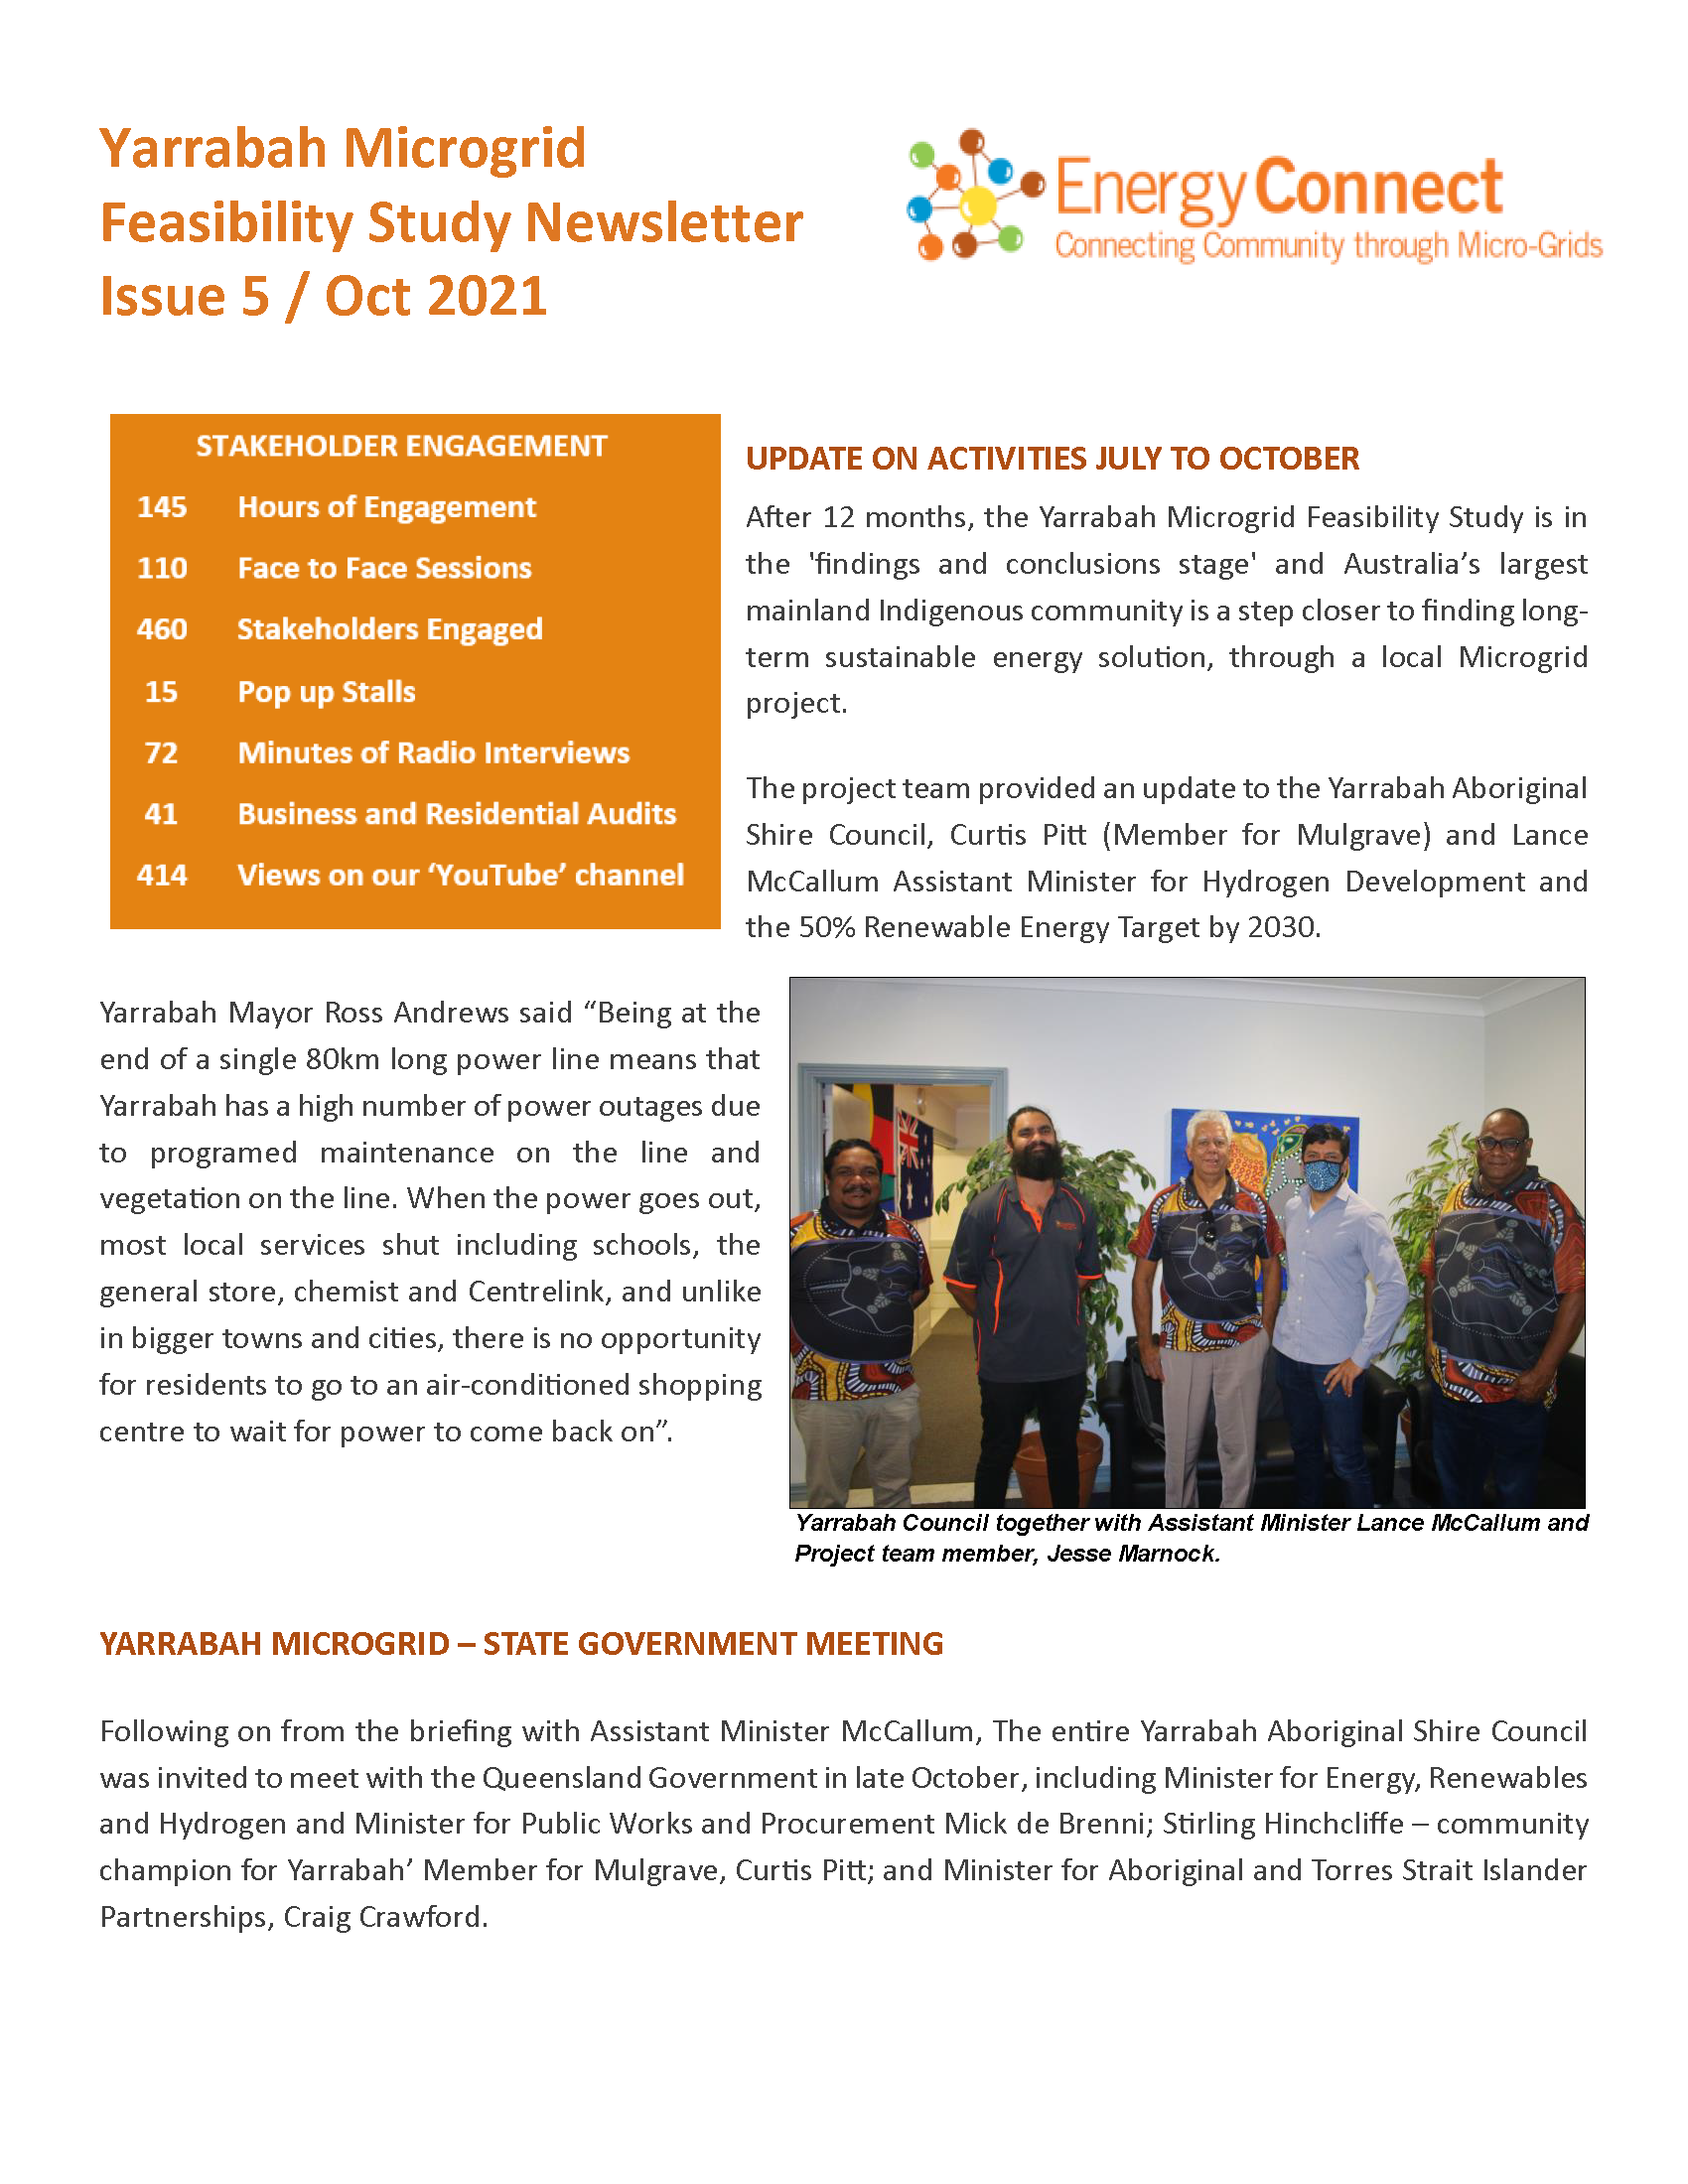 EnergyConnect - Yarrabah Microgrid Newsletter - Issue 5